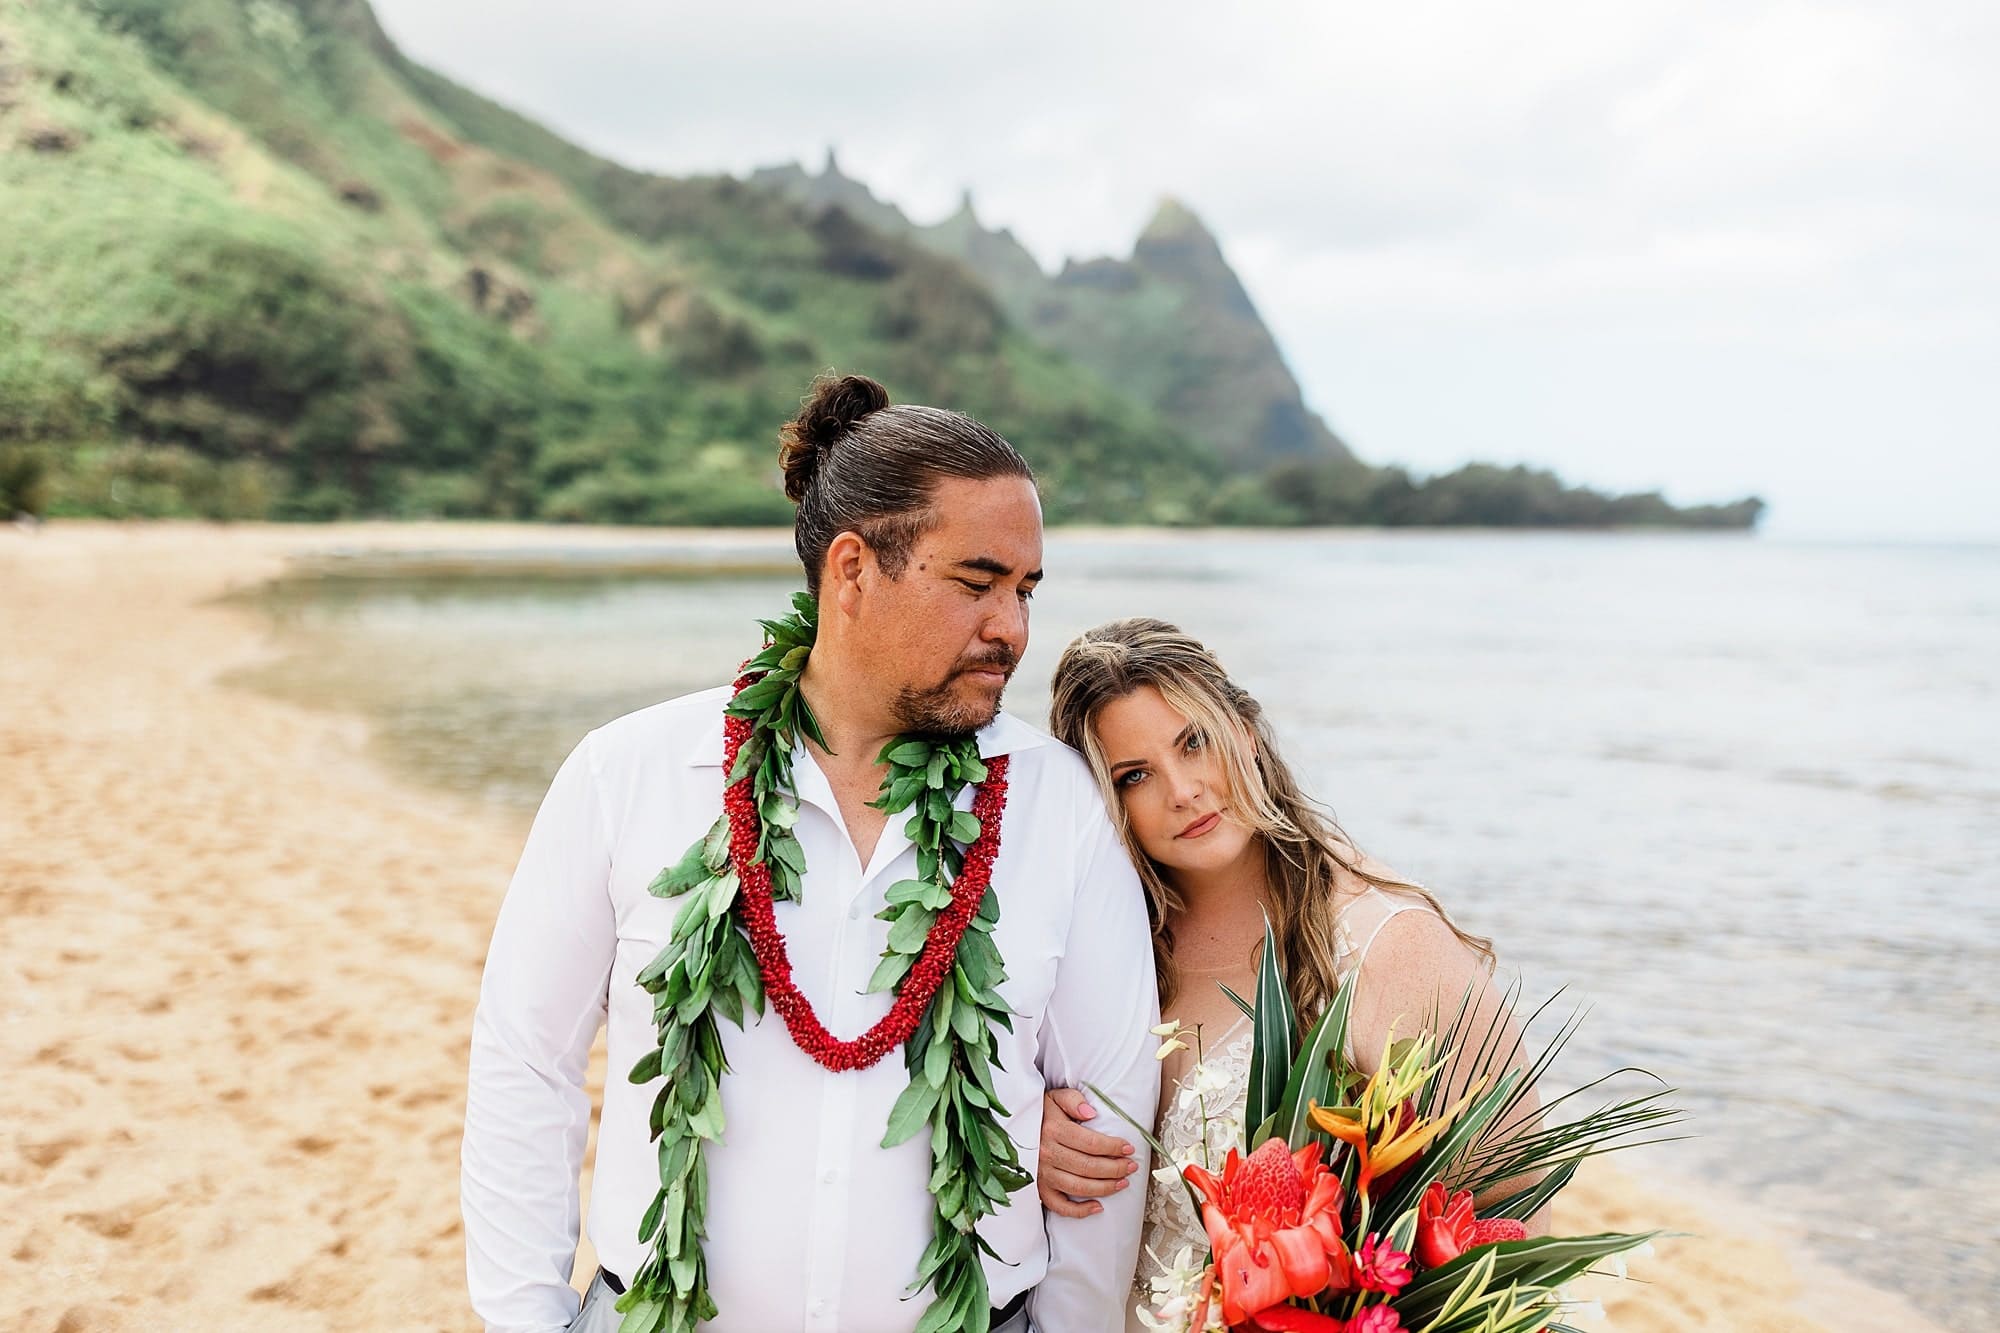 A wife rests her head on her husband's shoulder after their elopement in Hawaii